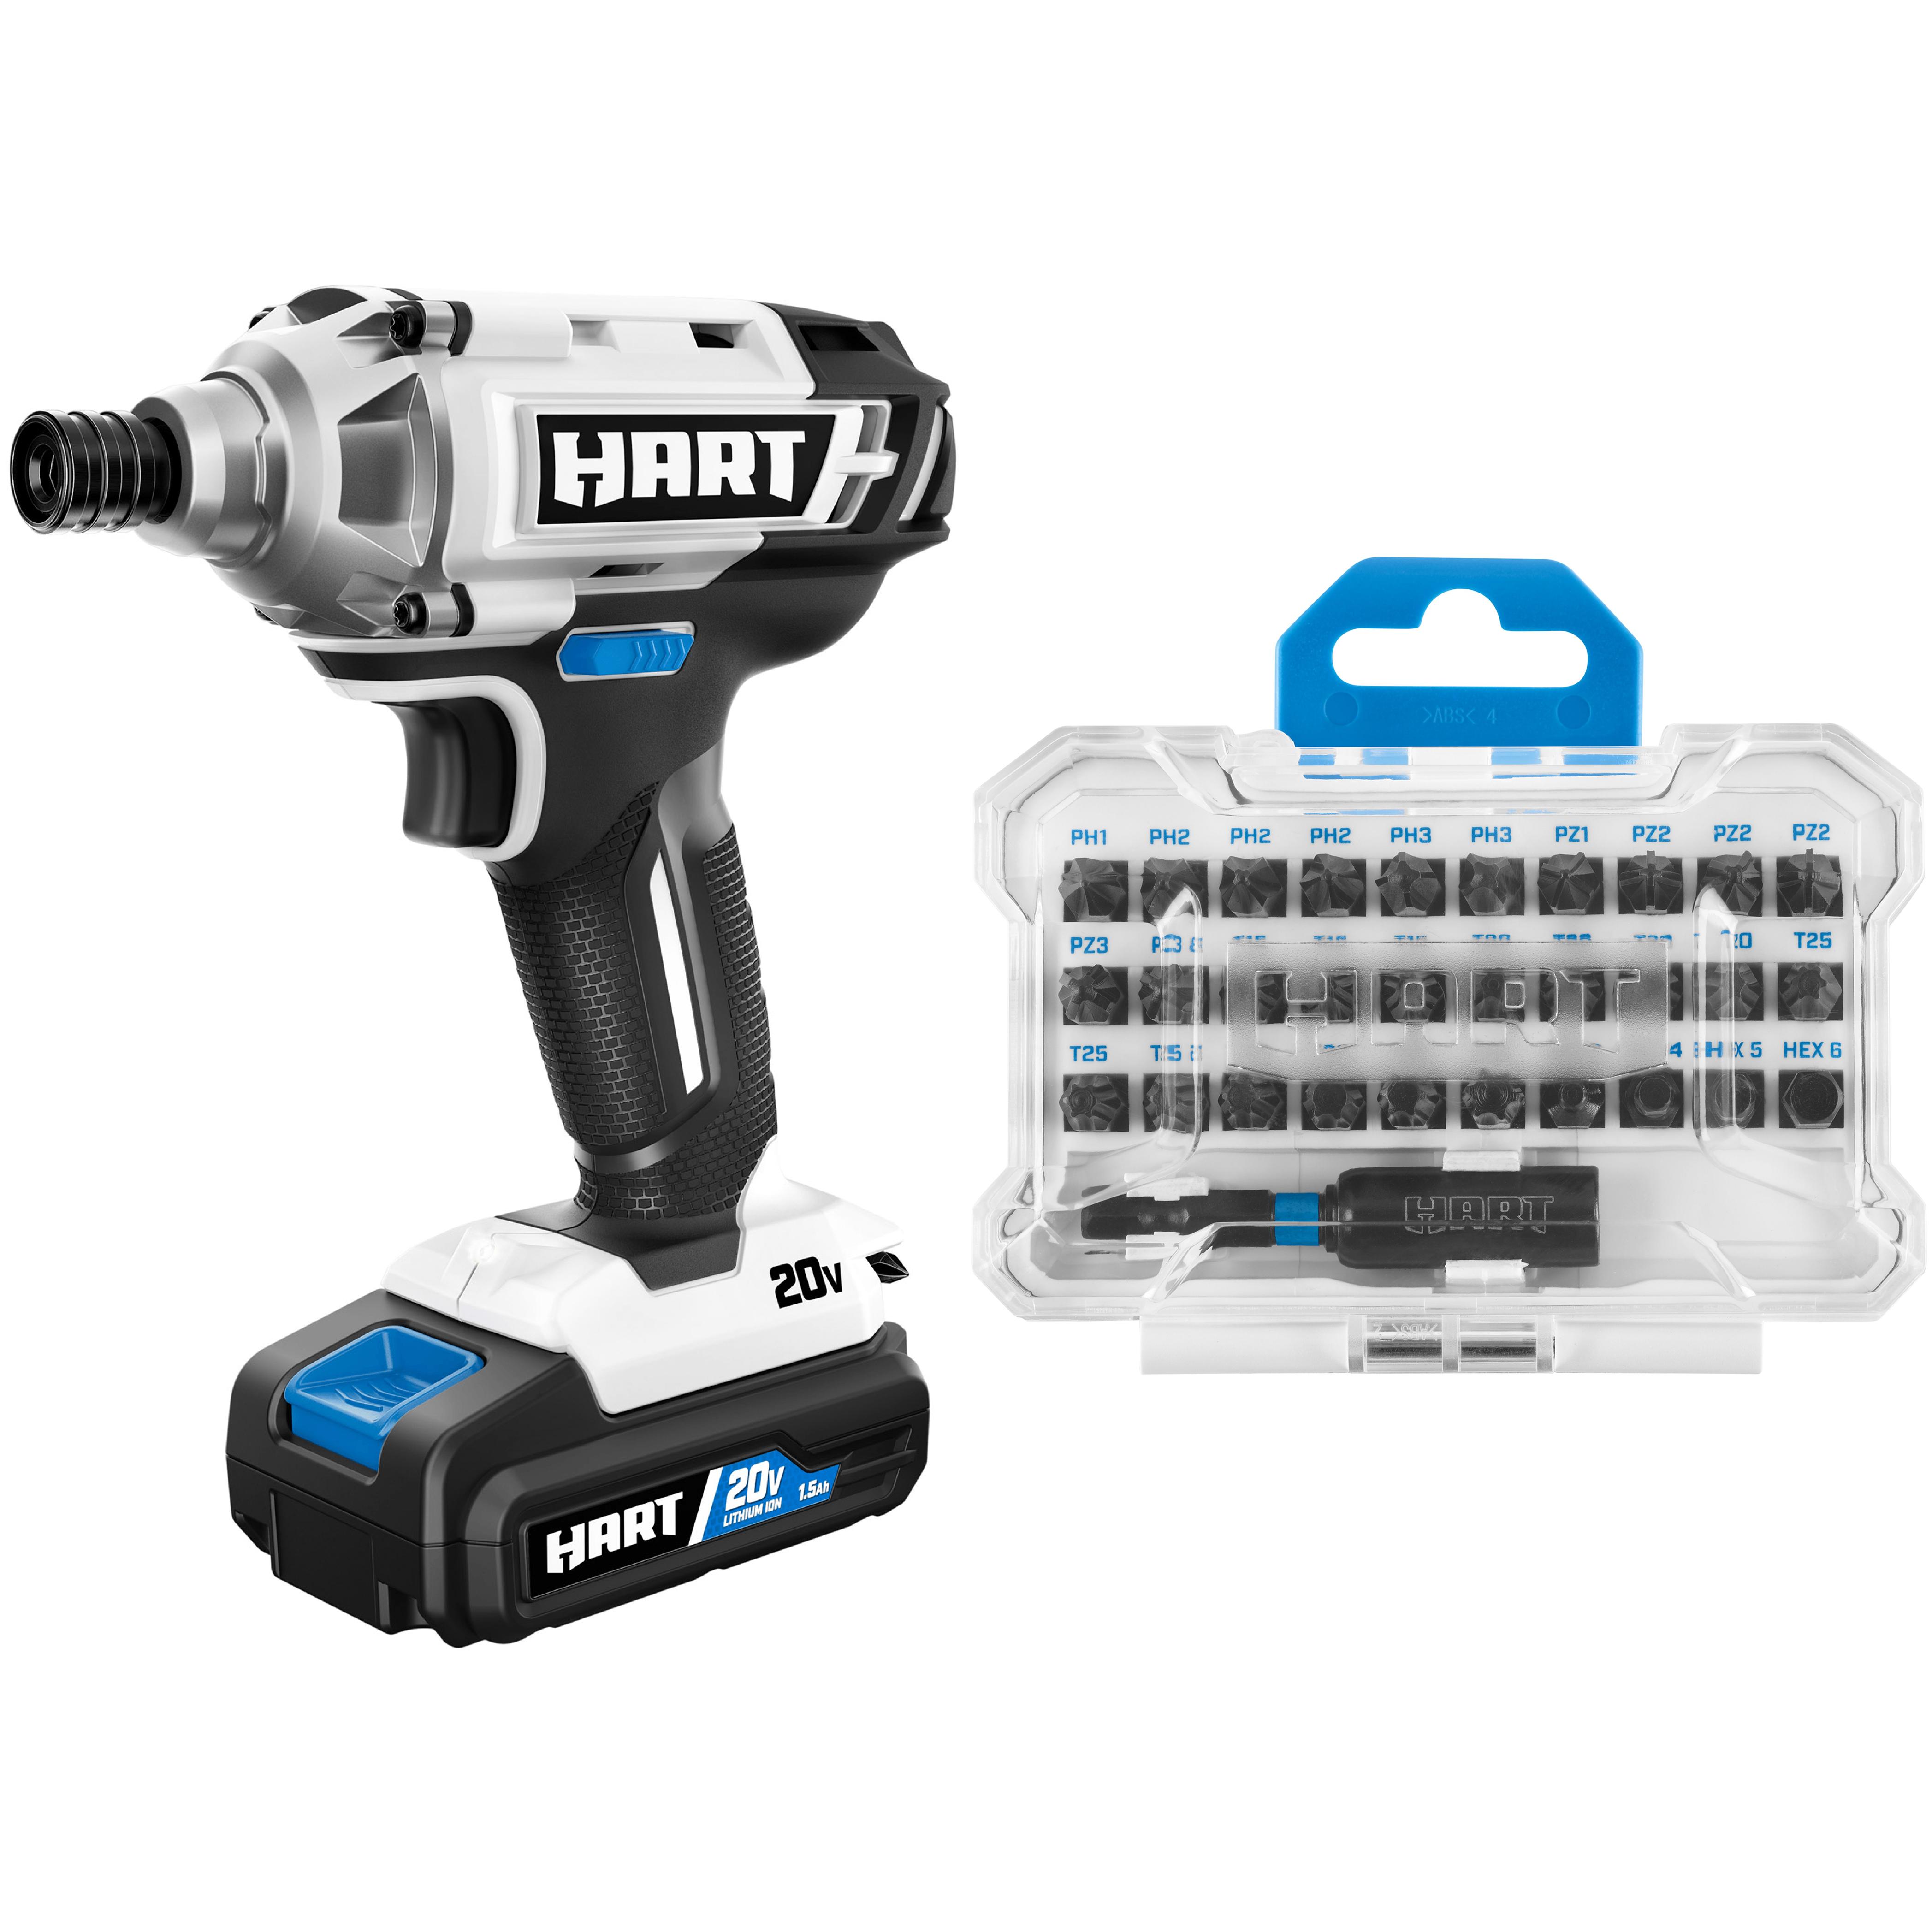 HART 20-Volt Impact Driver Kit with FREE Accessory - image 1 of 3